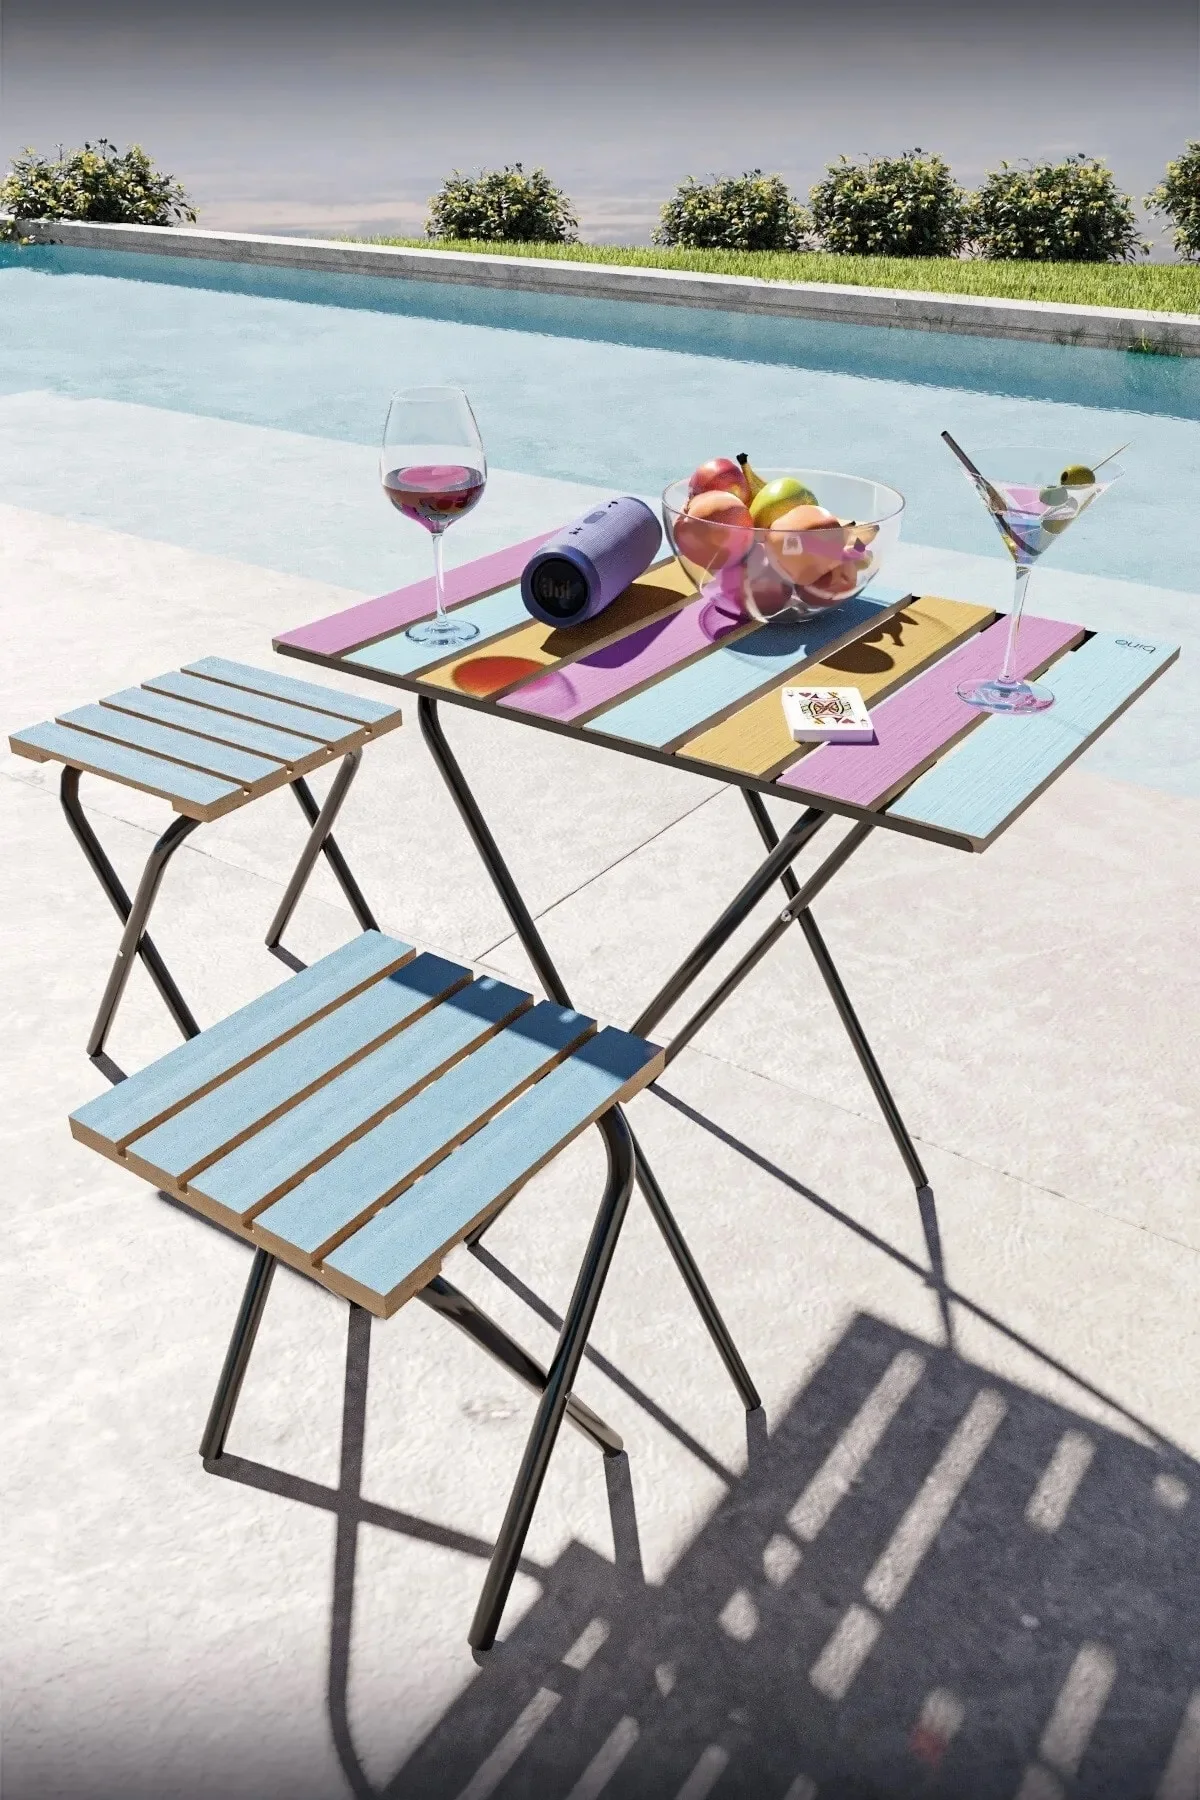 Portable Wood Camp Table & Chairs - Rustic Outdoor Furniture Set for Picnics and Camping Adventures colorful dining table set